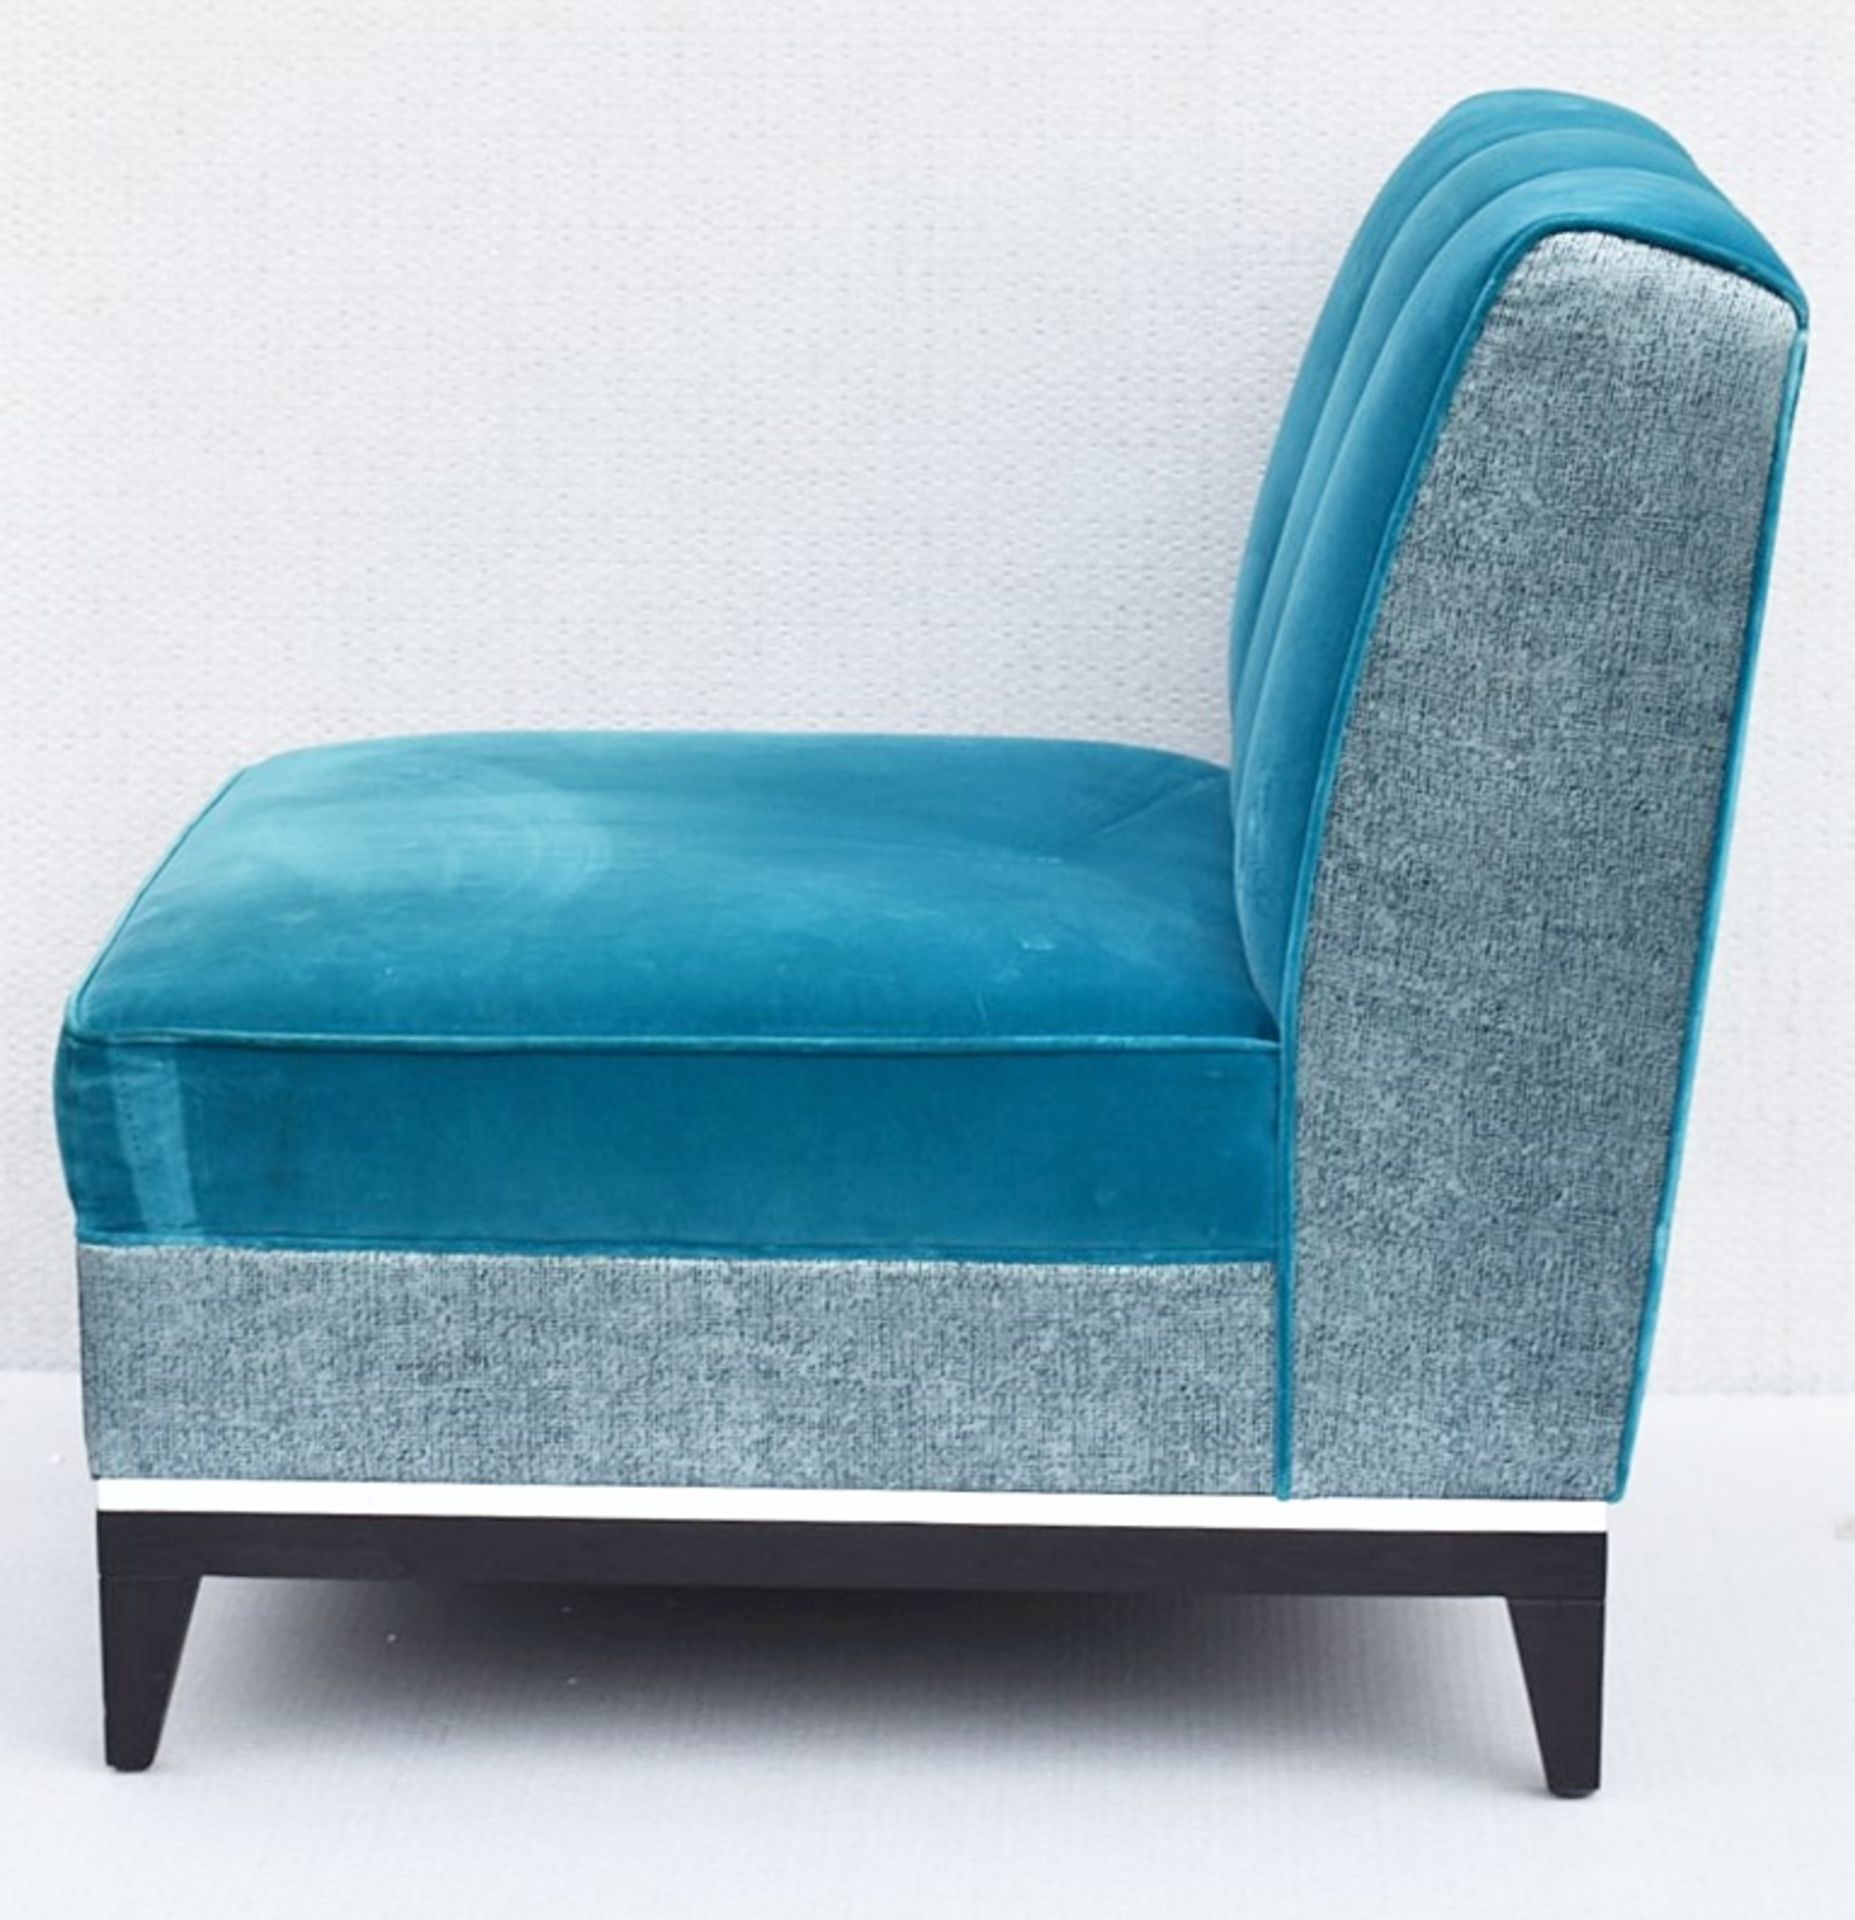 1 x Large Blue Velvet Upholstered Armchair - Ref: HBK501 / WH2 - CL987 - Location: Altrincham WA14* - Image 3 of 10